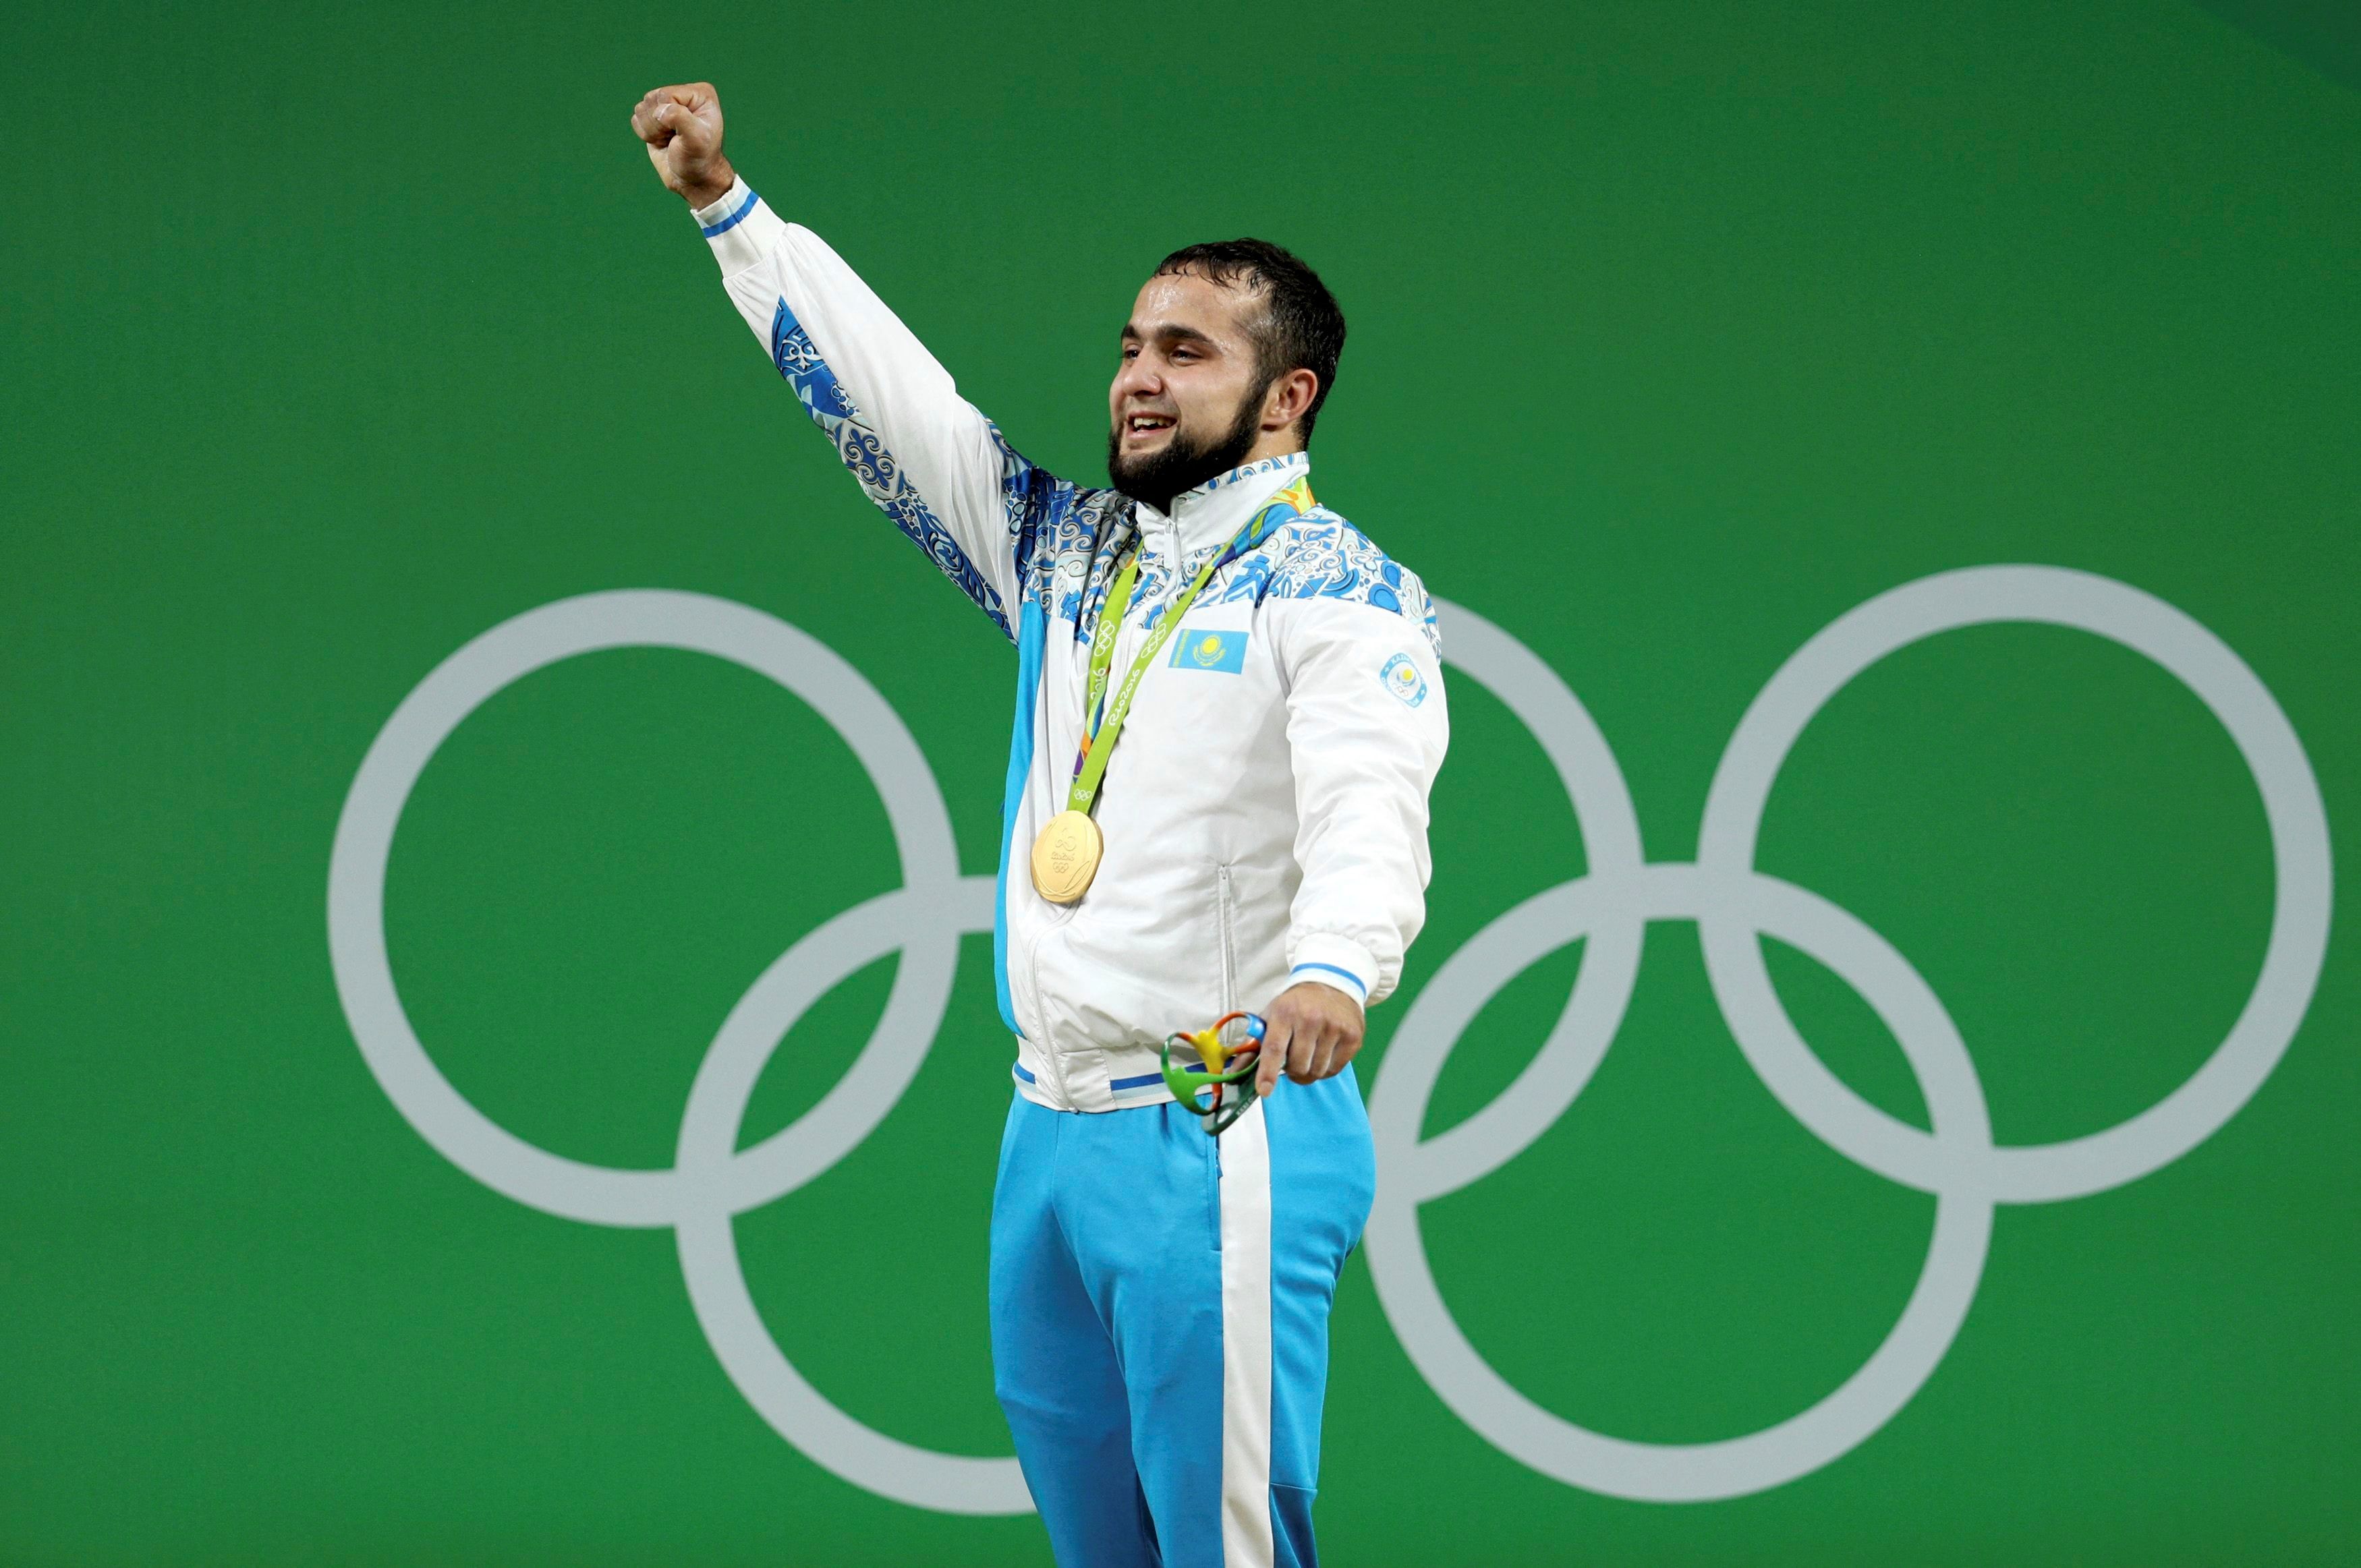 FILE PHOTO: 2016 Rio Olympics - Weightlifting - Victory Ceremony - Men's 77kg Victory Ceremony - Riocentro - Pavilion 2 - Rio de Janeiro, Brazil - 10/08/2016. Nijat Rahimov (KAZ) of Kazakhstan poses with his gold medal. REUTERS/Stoyan Nenov FOR EDITORIAL USE ONLY. NOT FOR SALE FOR MARKETING OR ADVERTISING CAMPAIGNS./File Photo